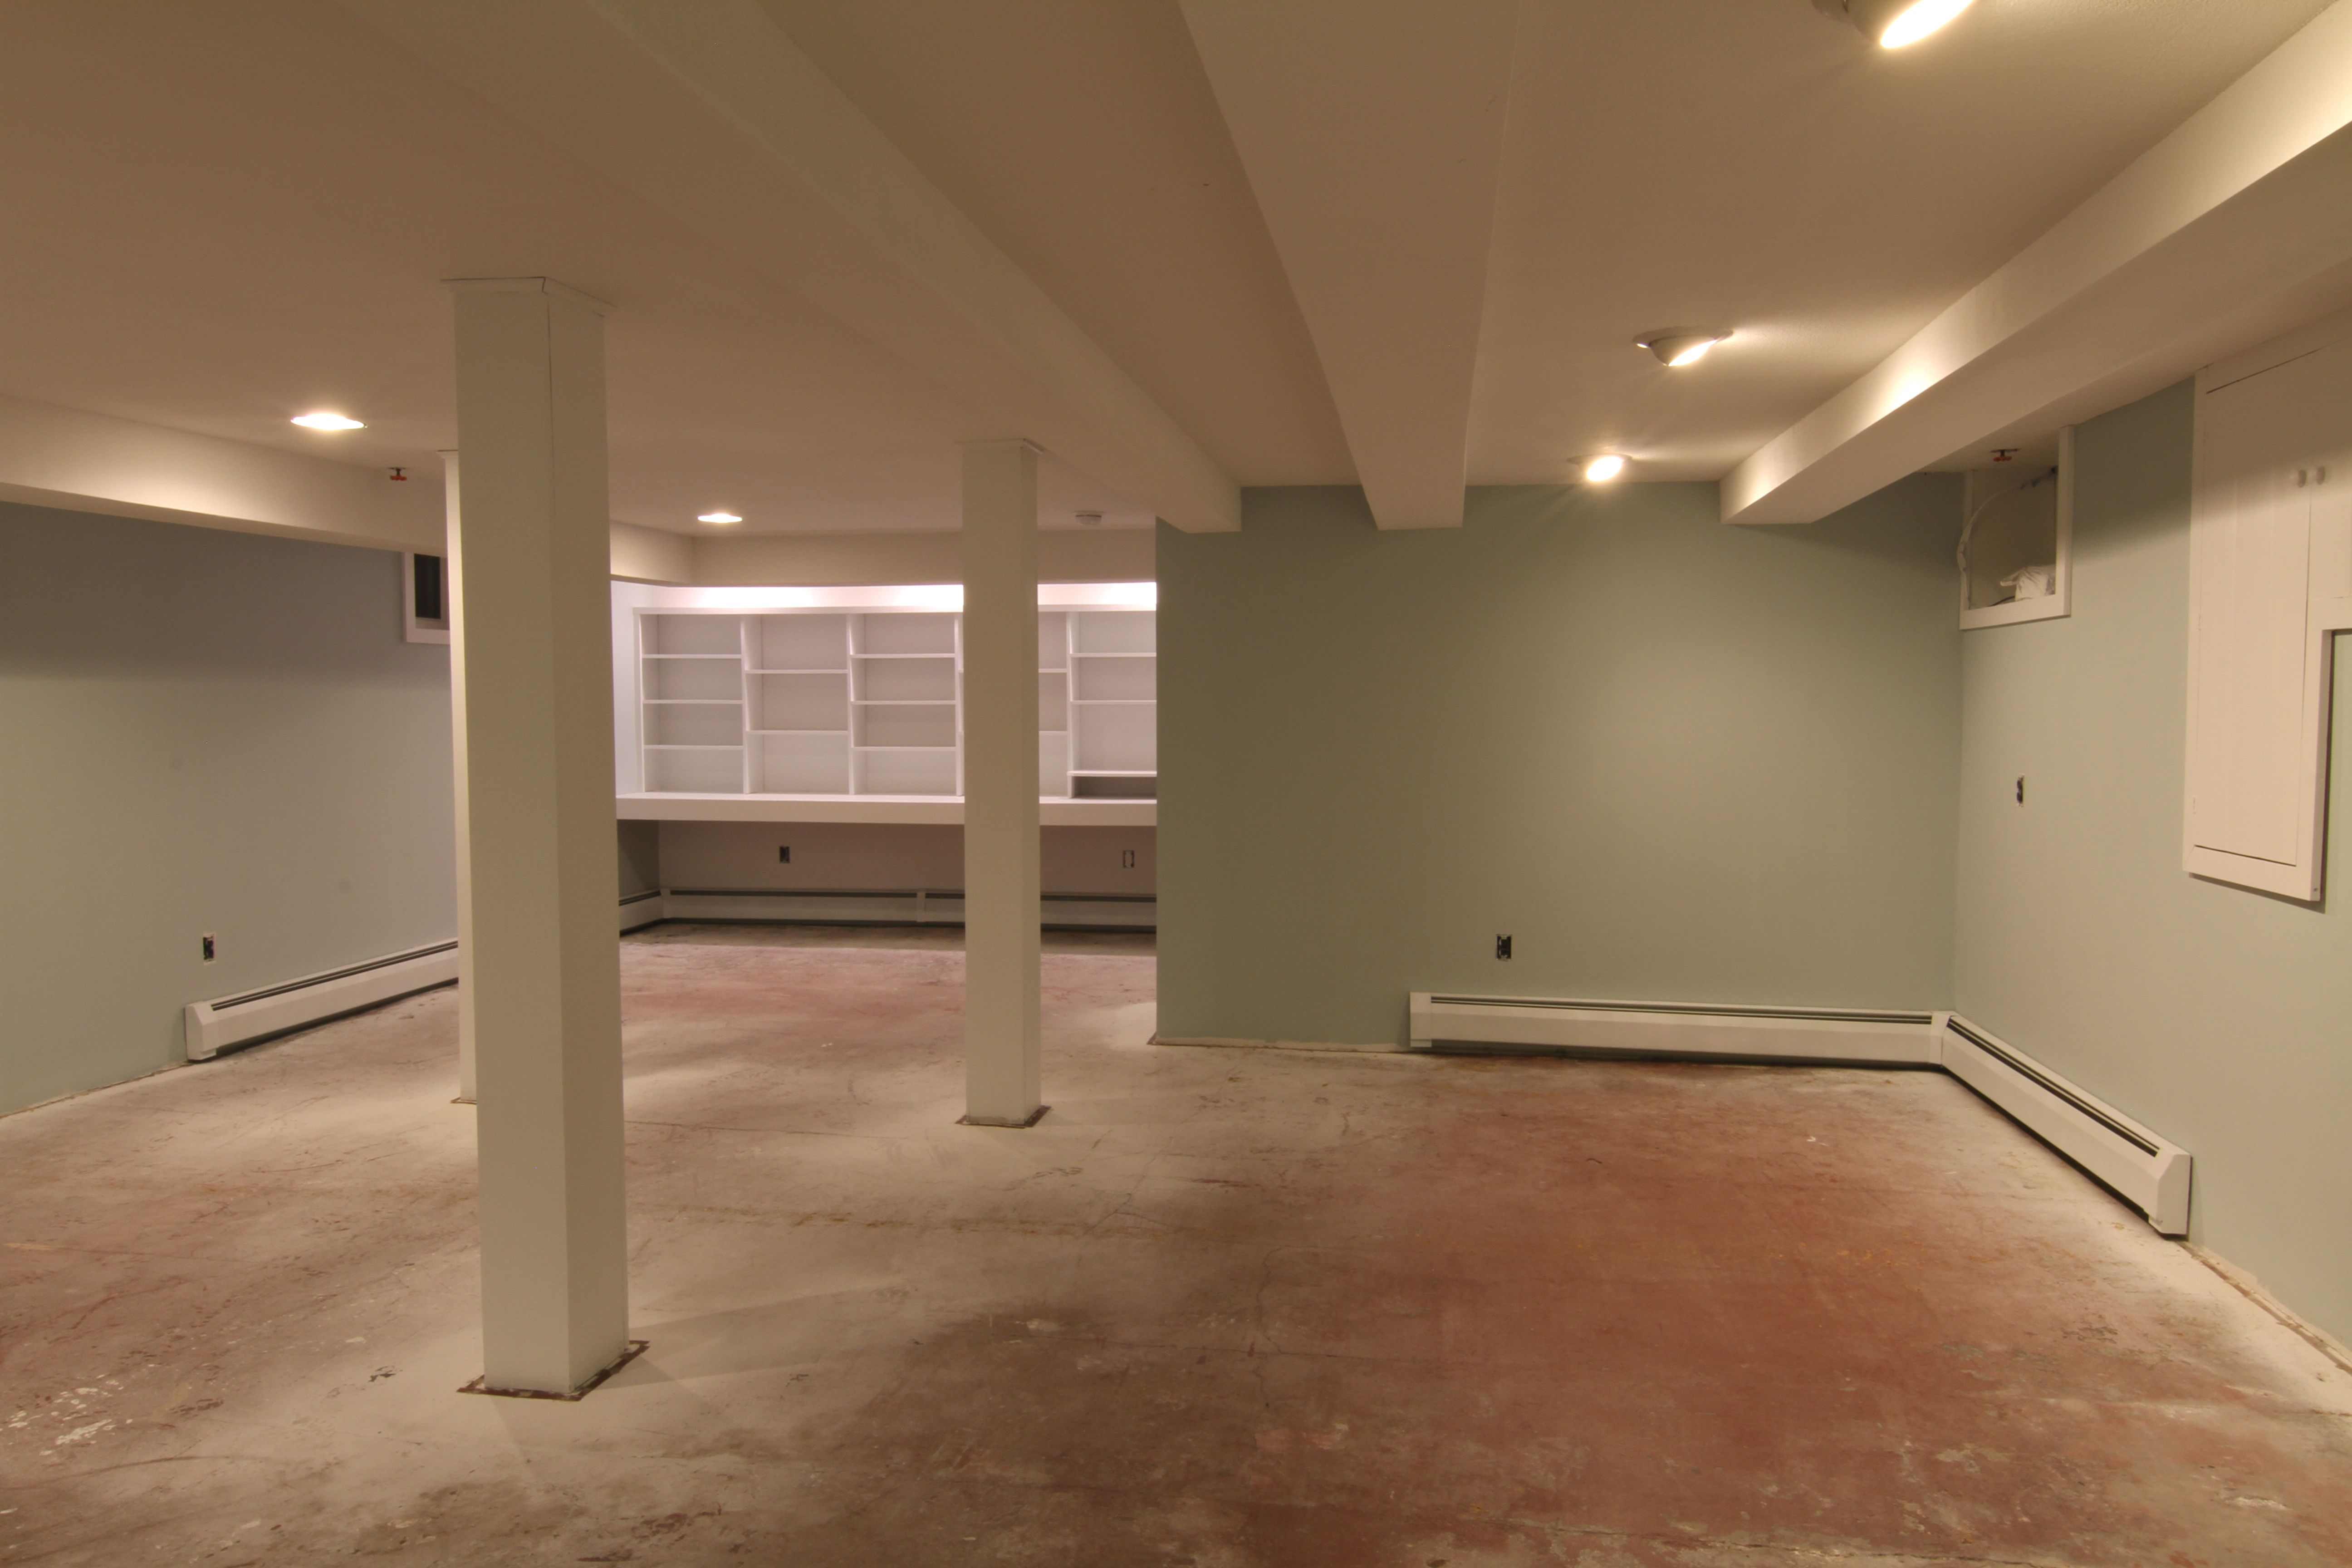 DURING: Even with the painted concrete floor, the space was beginning to settle into someplace delightful.